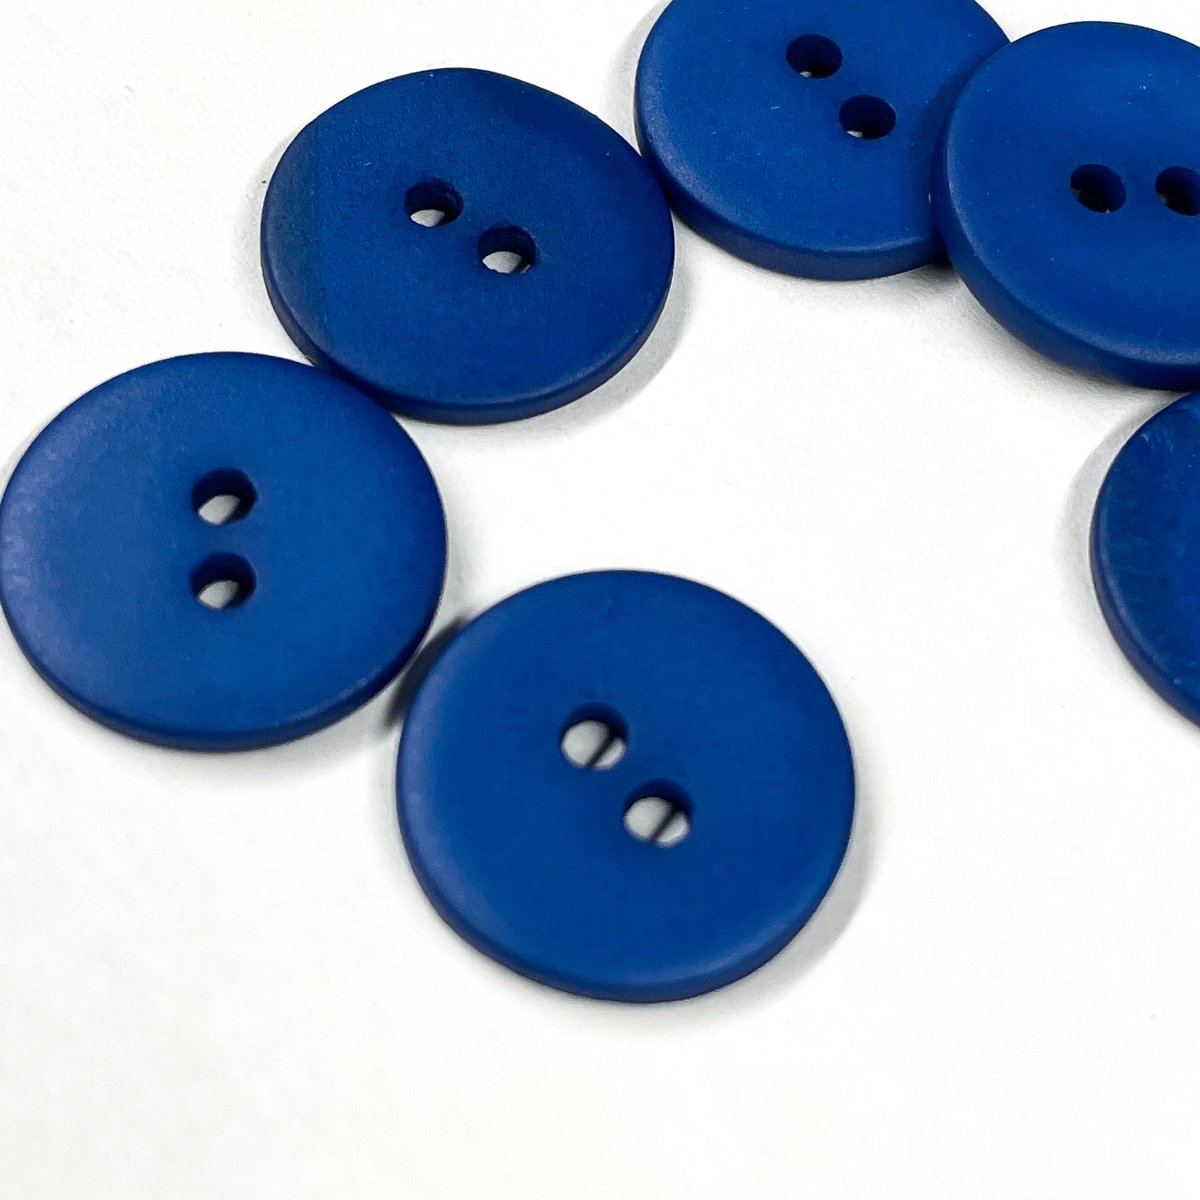 Fancy wood buttons (by one) - Wood/Biscuit - 12 mm – Ikatee sewing patterns